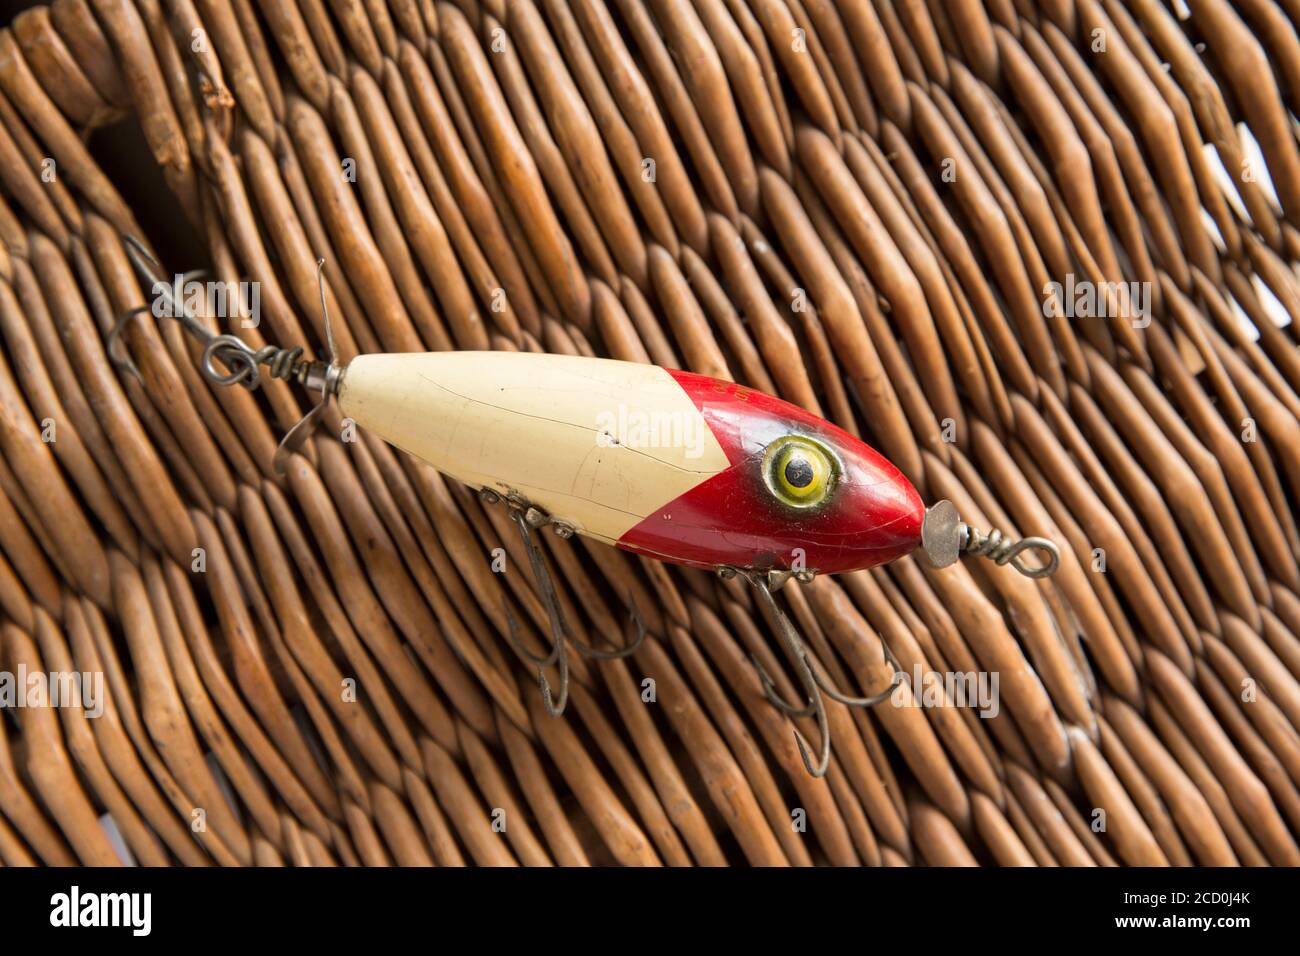 https://c8.alamy.com/comp/2CD0J4K/an-old-south-bend-fishing-lure-or-plug-designed-for-catching-predatory-fish-photographed-against-the-whicker-lid-of-an-old-tackle-box-from-a-collec-2CD0J4K.jpg